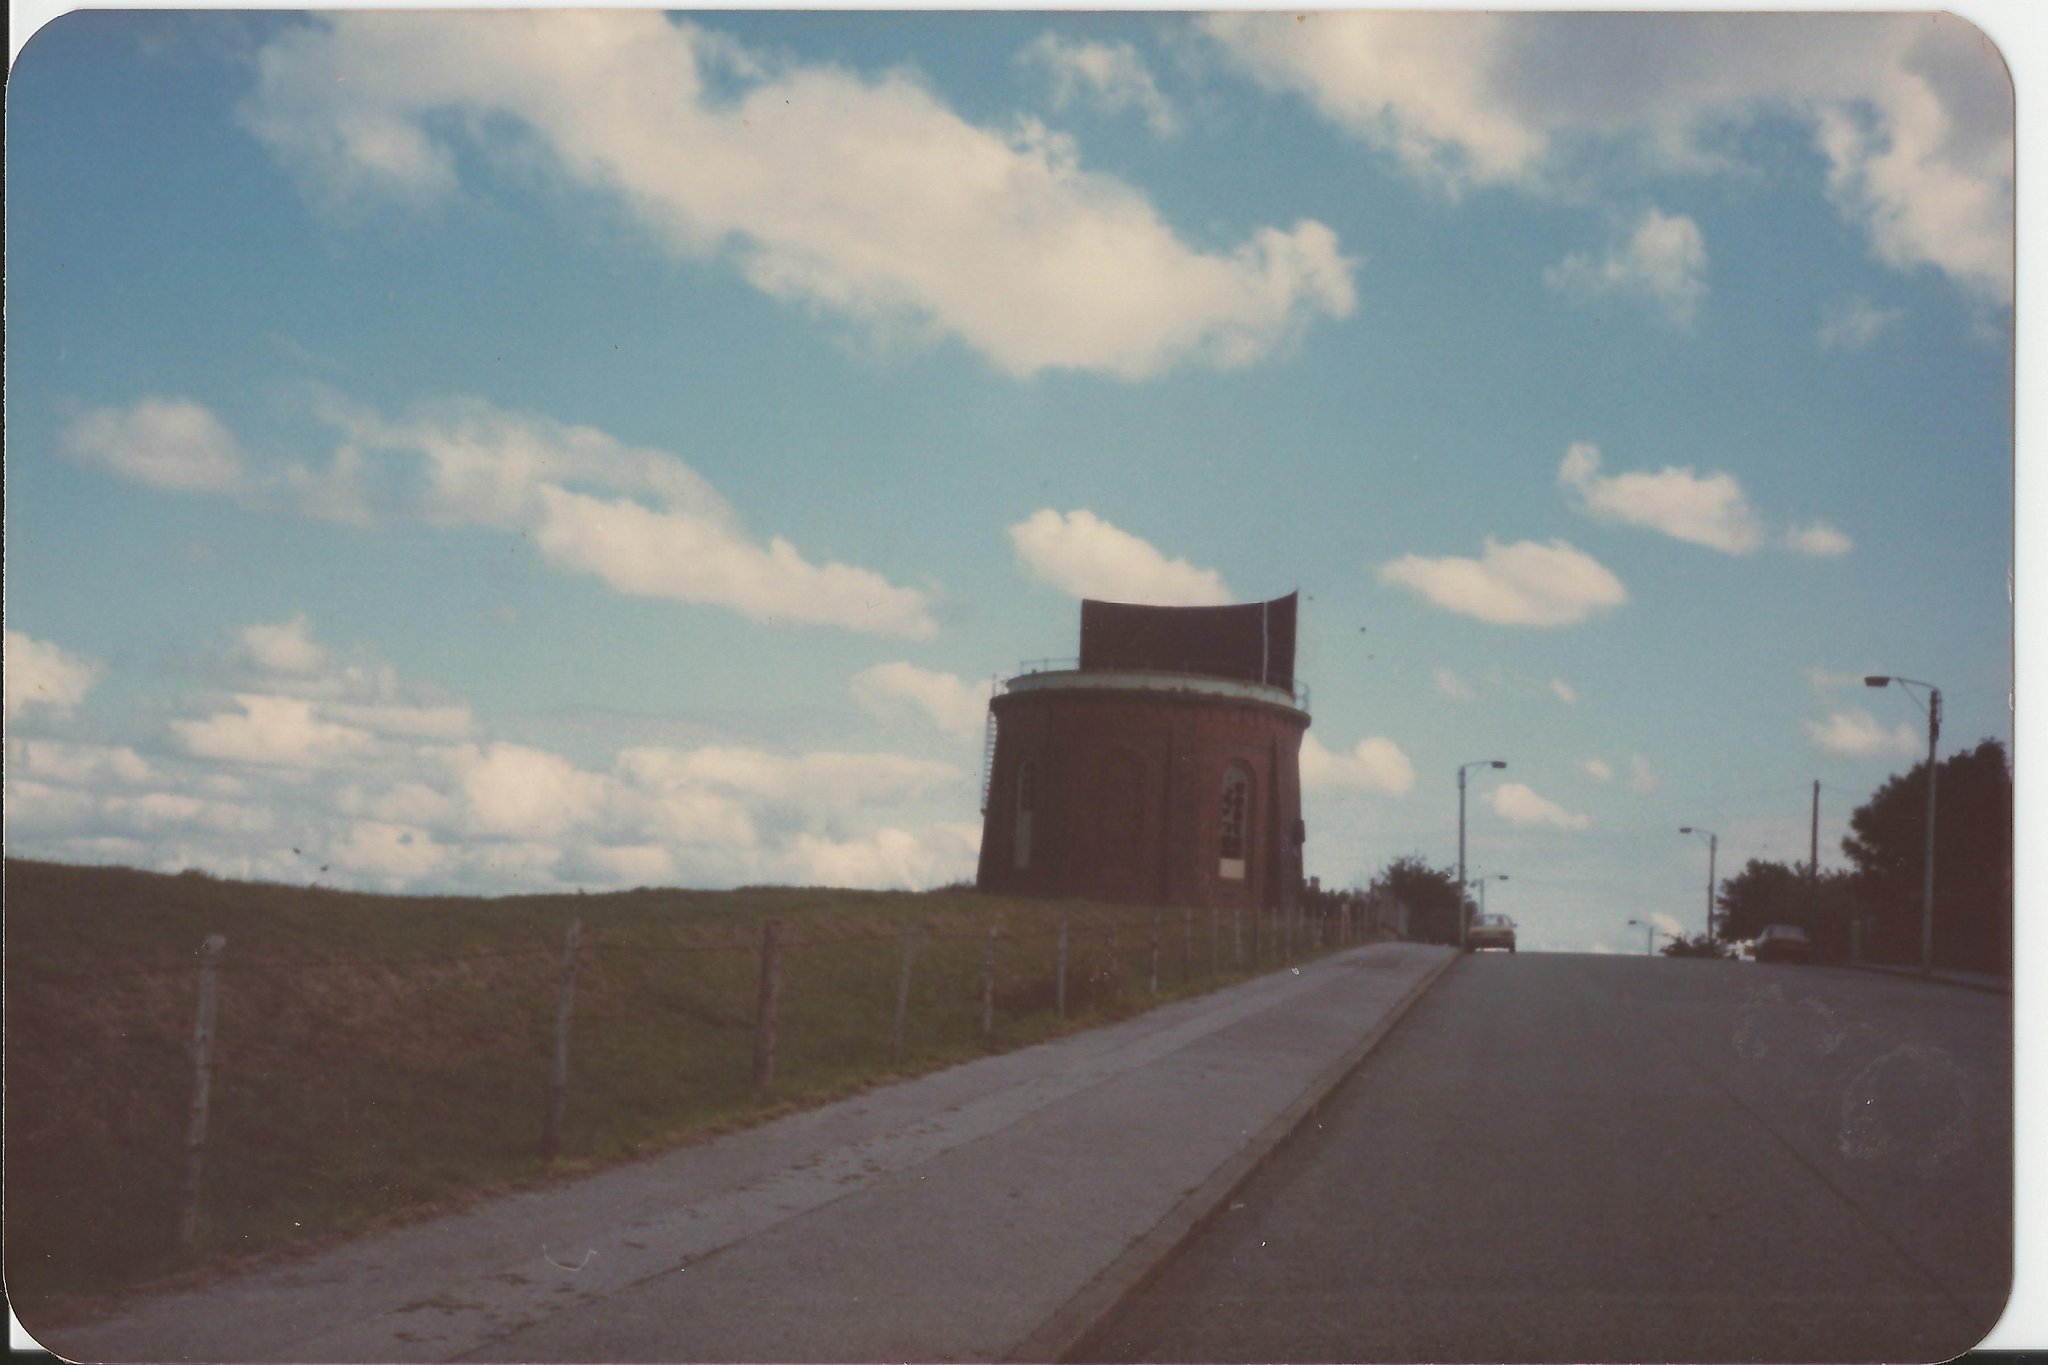 A photo of Water Tower